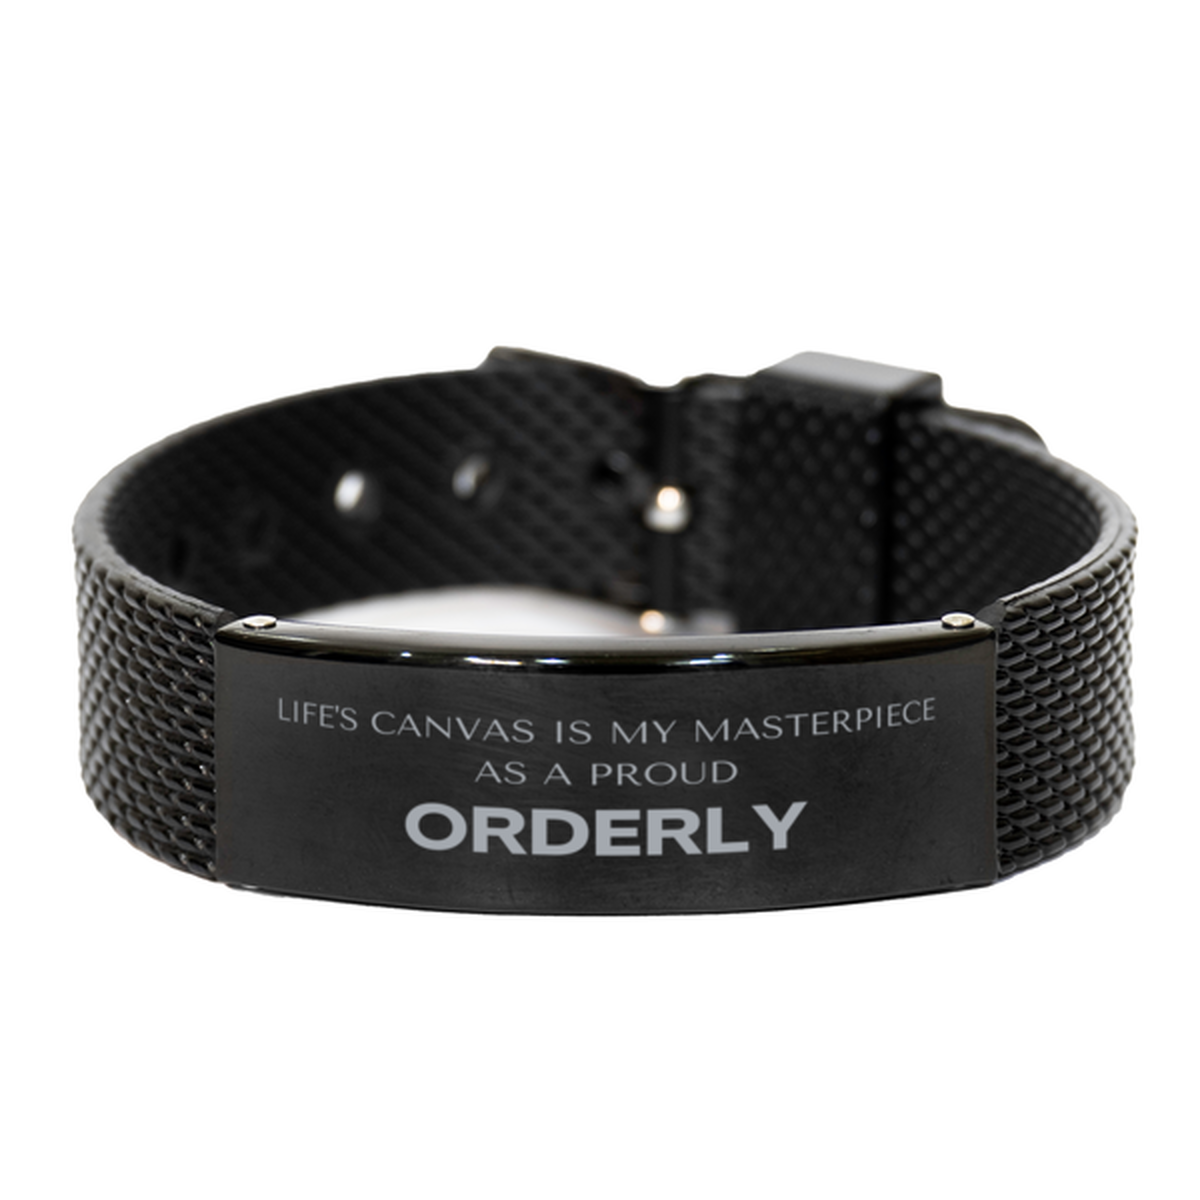 Proud Orderly Gifts, Life's canvas is my masterpiece, Epic Birthday Christmas Unique Black Shark Mesh Bracelet For Orderly, Coworkers, Men, Women, Friends